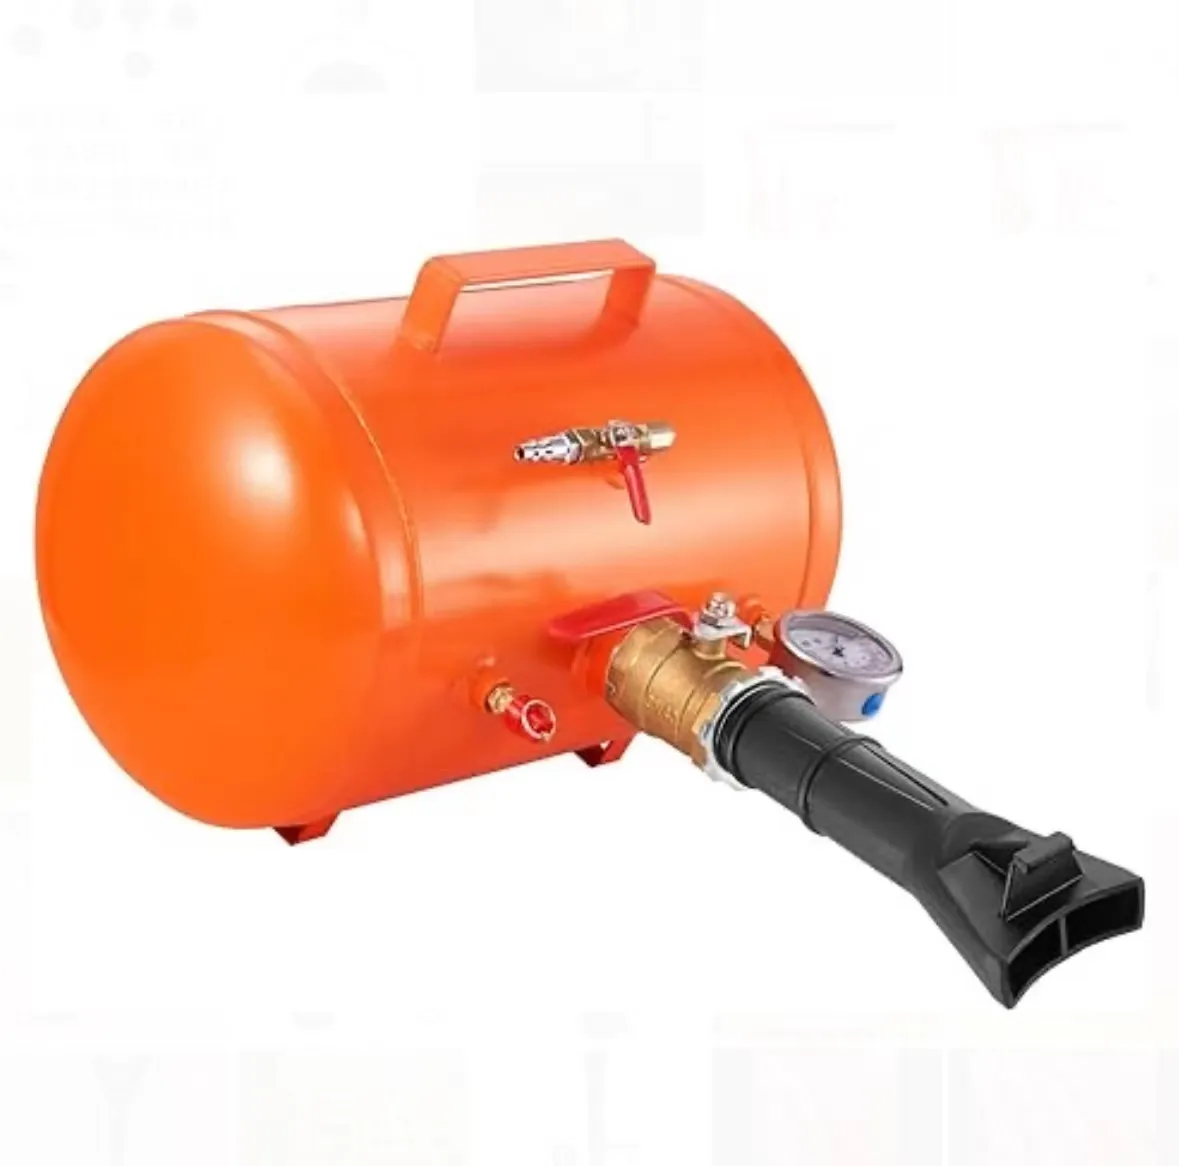 Factory price top quality 5 Gallon Vehicle Air Tire Bead Seater Blaster with Pressure Gauge &Seating Tool Inflator Tank